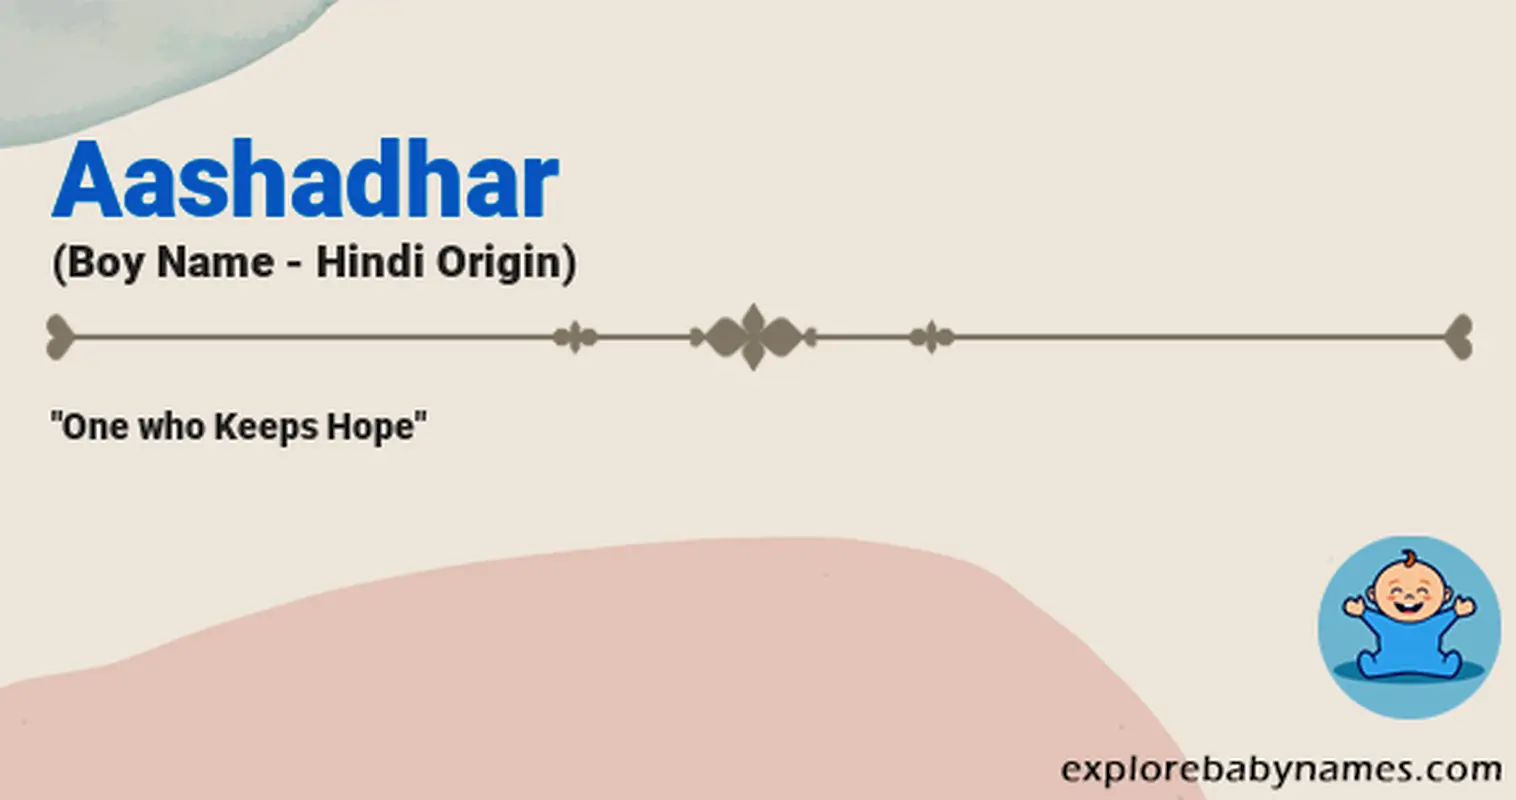 Meaning of Aashadhar